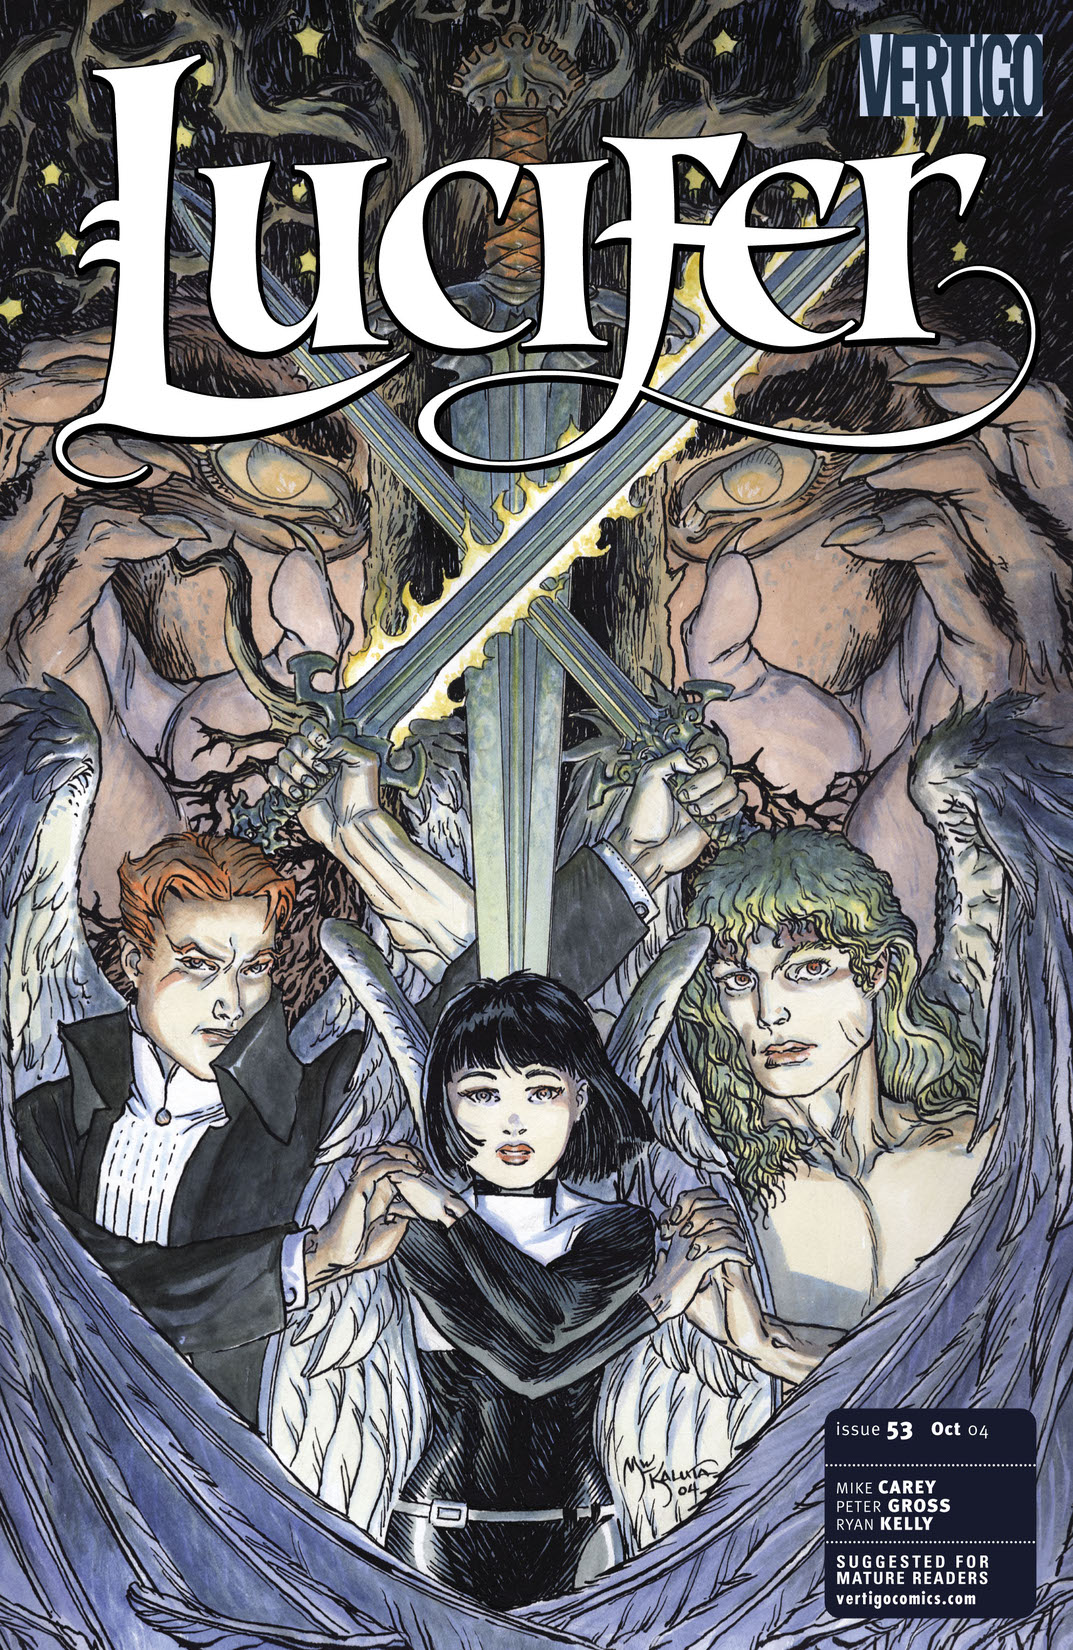 Lucifer #53 preview images